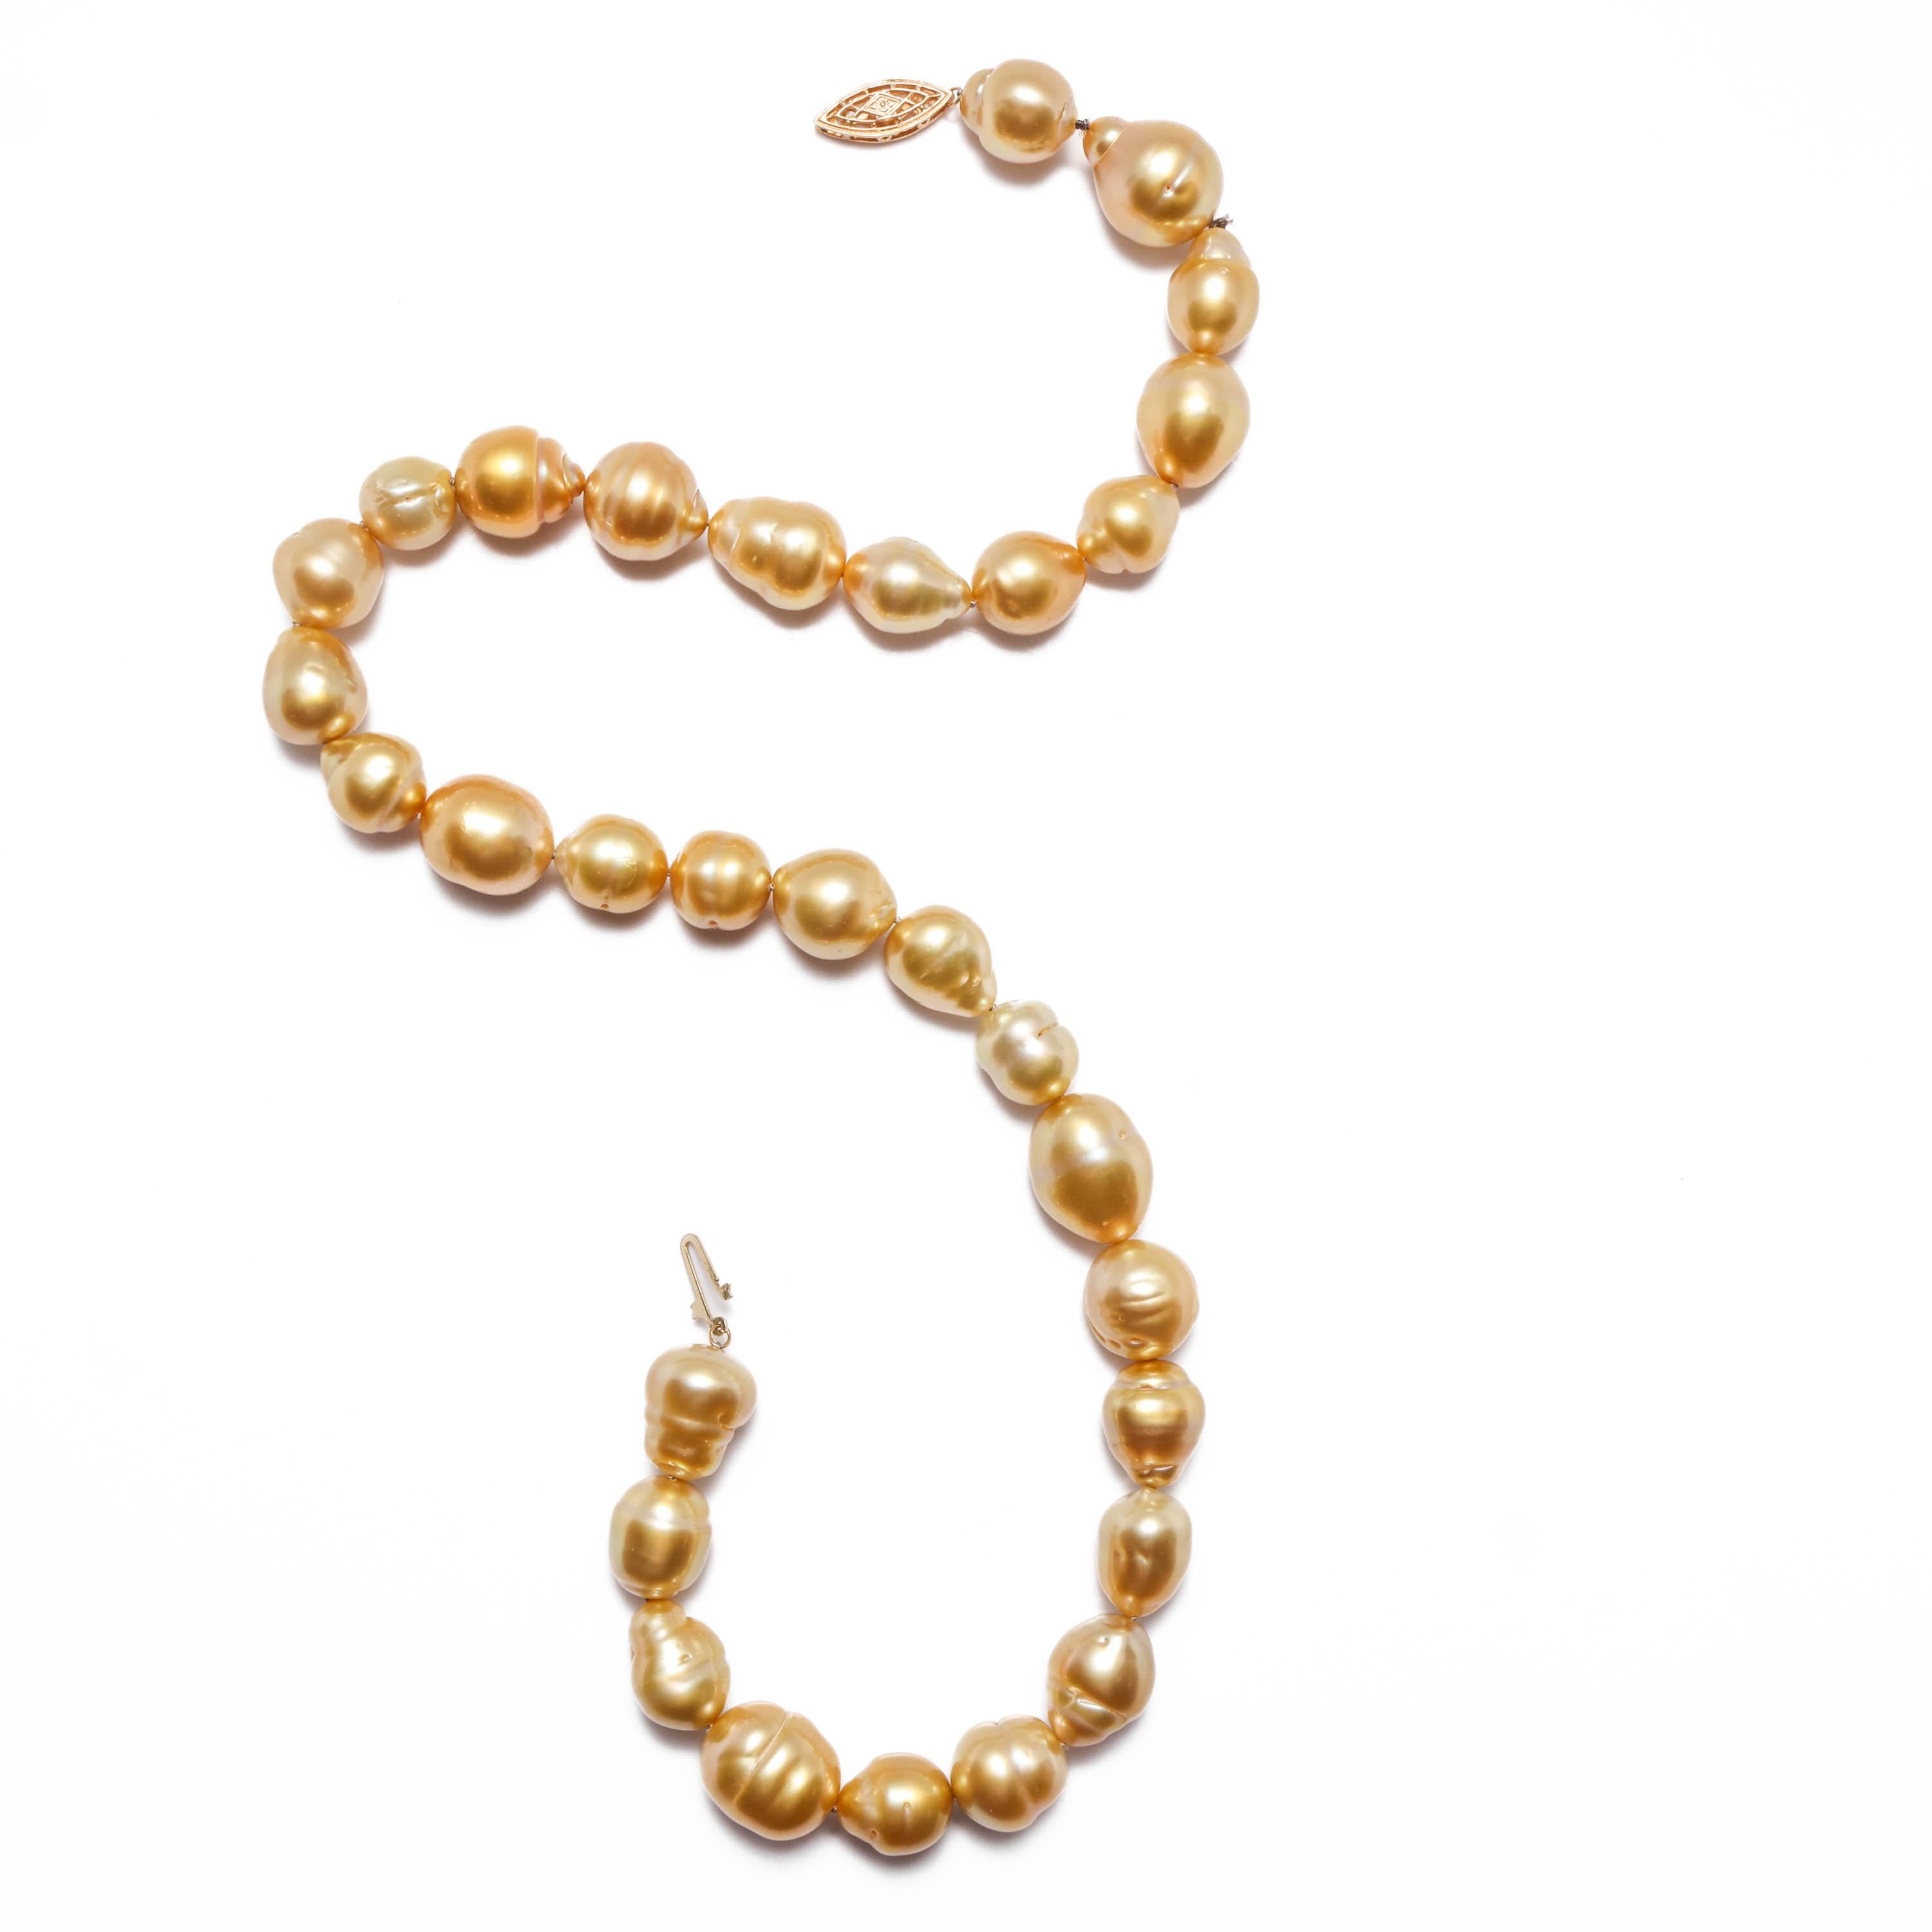 Thirty-one luminous and golden baroque South Sea pearls compose a new and unworn 17